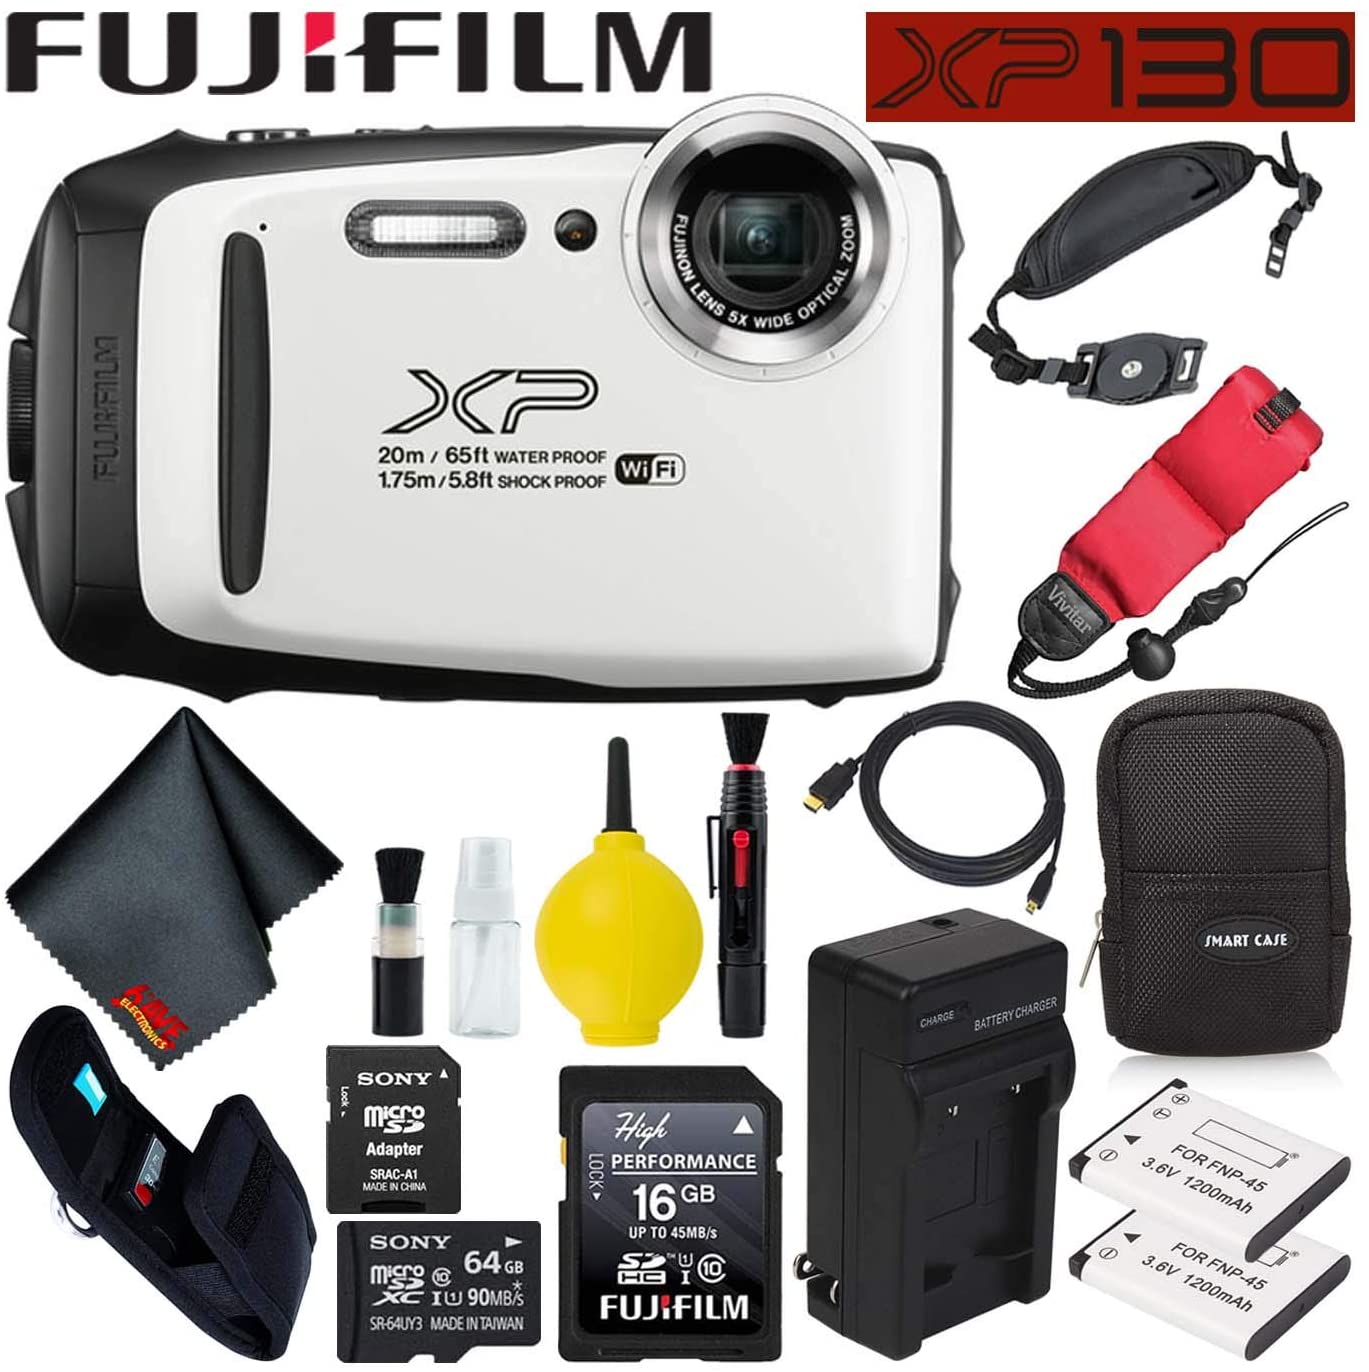 B07TGTBT93 Fujifilm FinePix XP130 Waterproof Digital Camera 600019827  (White) Large Accessory Bundle Includes Floating Wrist Strap, Battery  Charger, 